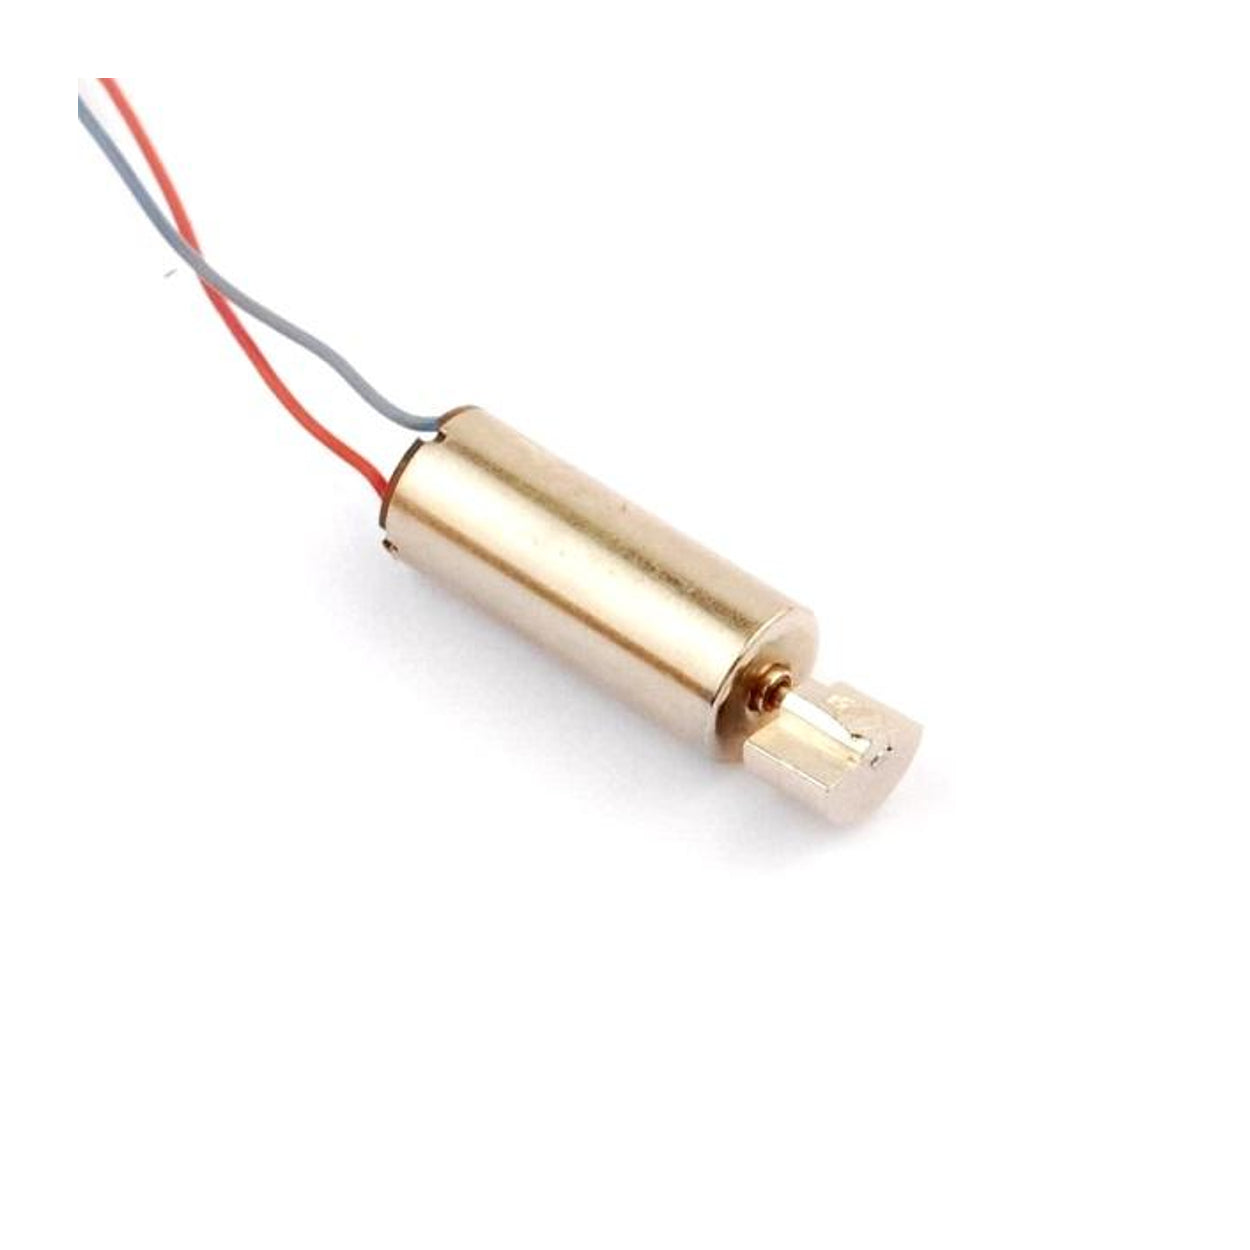 1.5-5V DC Vibration Motor with Wire